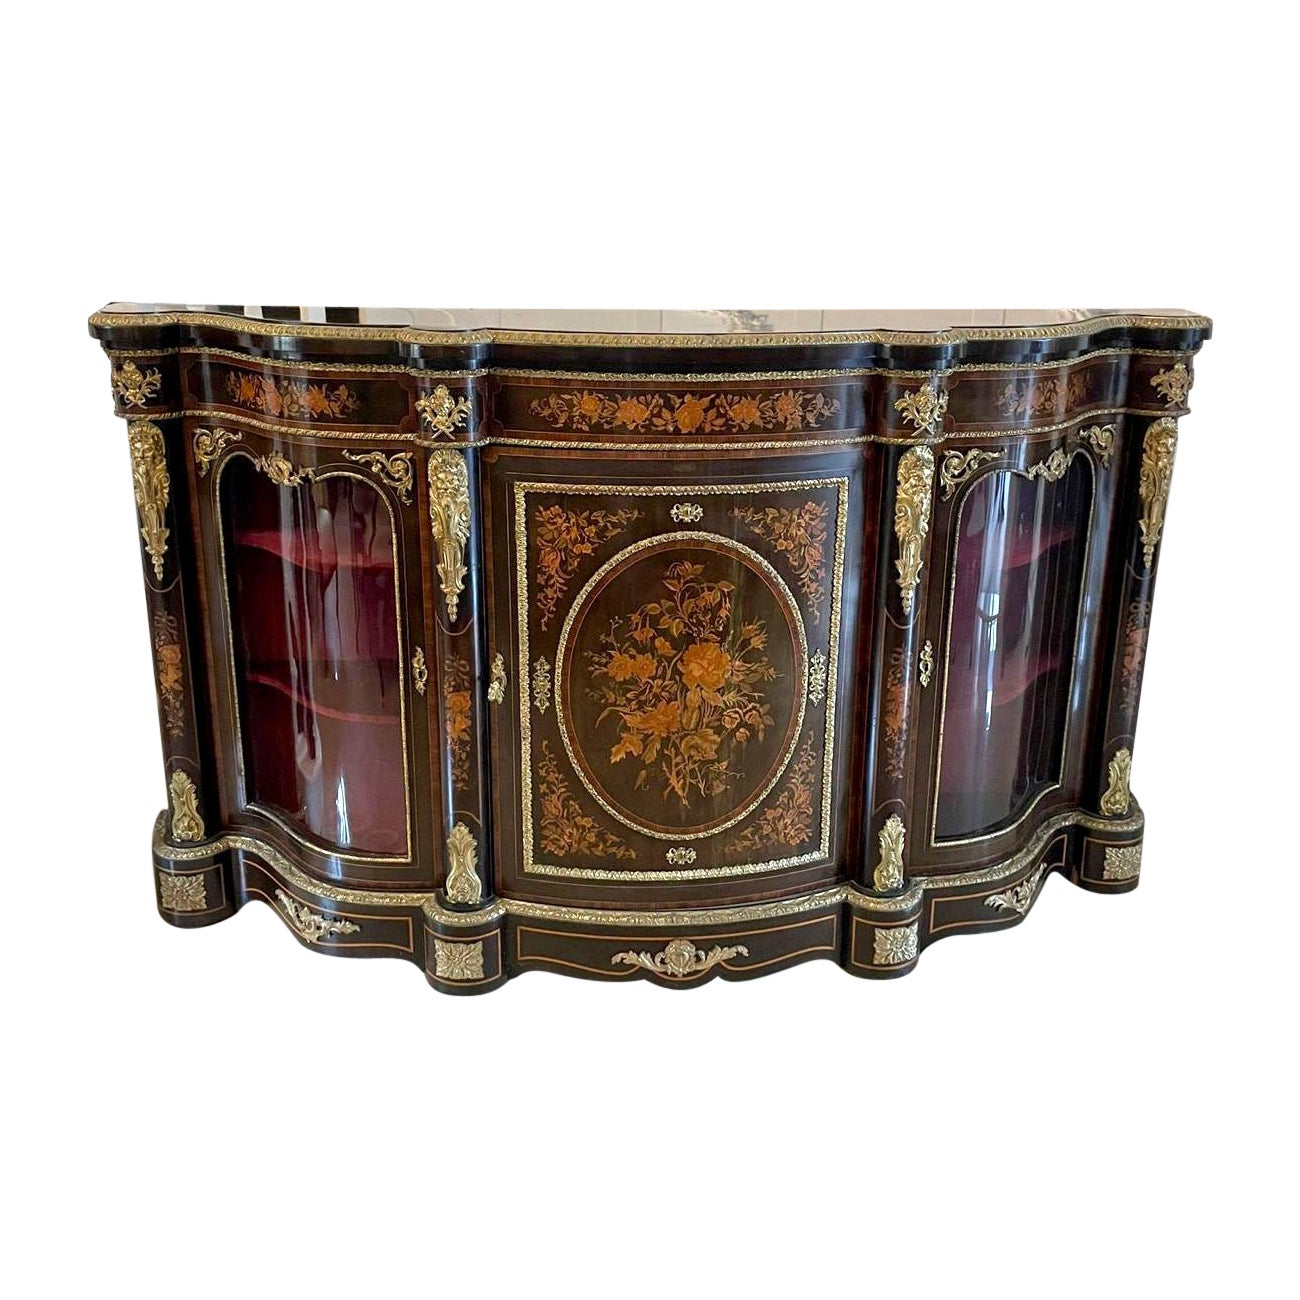 Outstanding Antique Victorian Floral Marquetry Ormolu Mounted Credenza/Sideboard For Sale